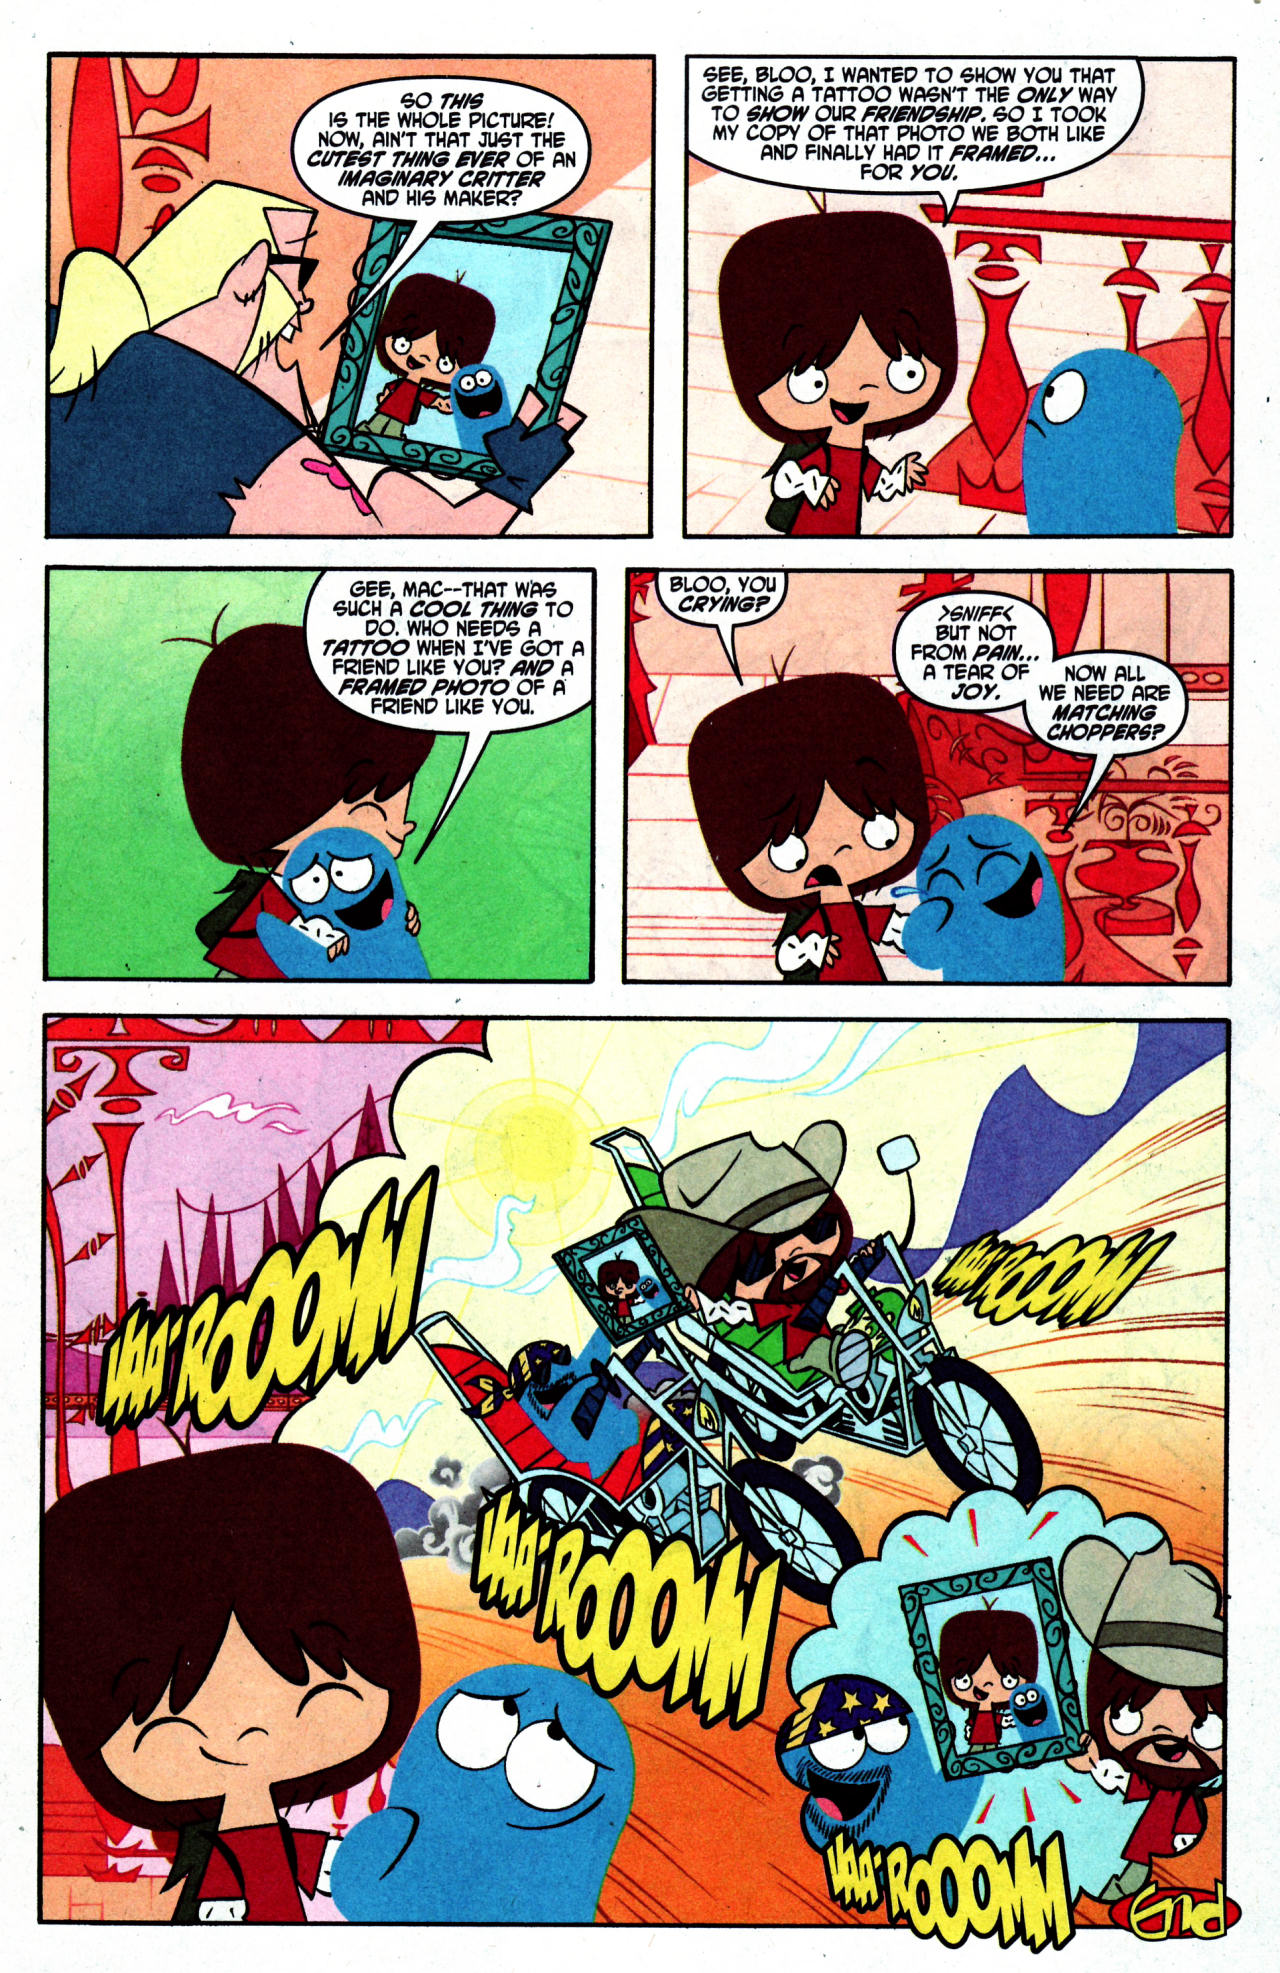 Read online Cartoon Network Block Party comic -  Issue #36 - 12